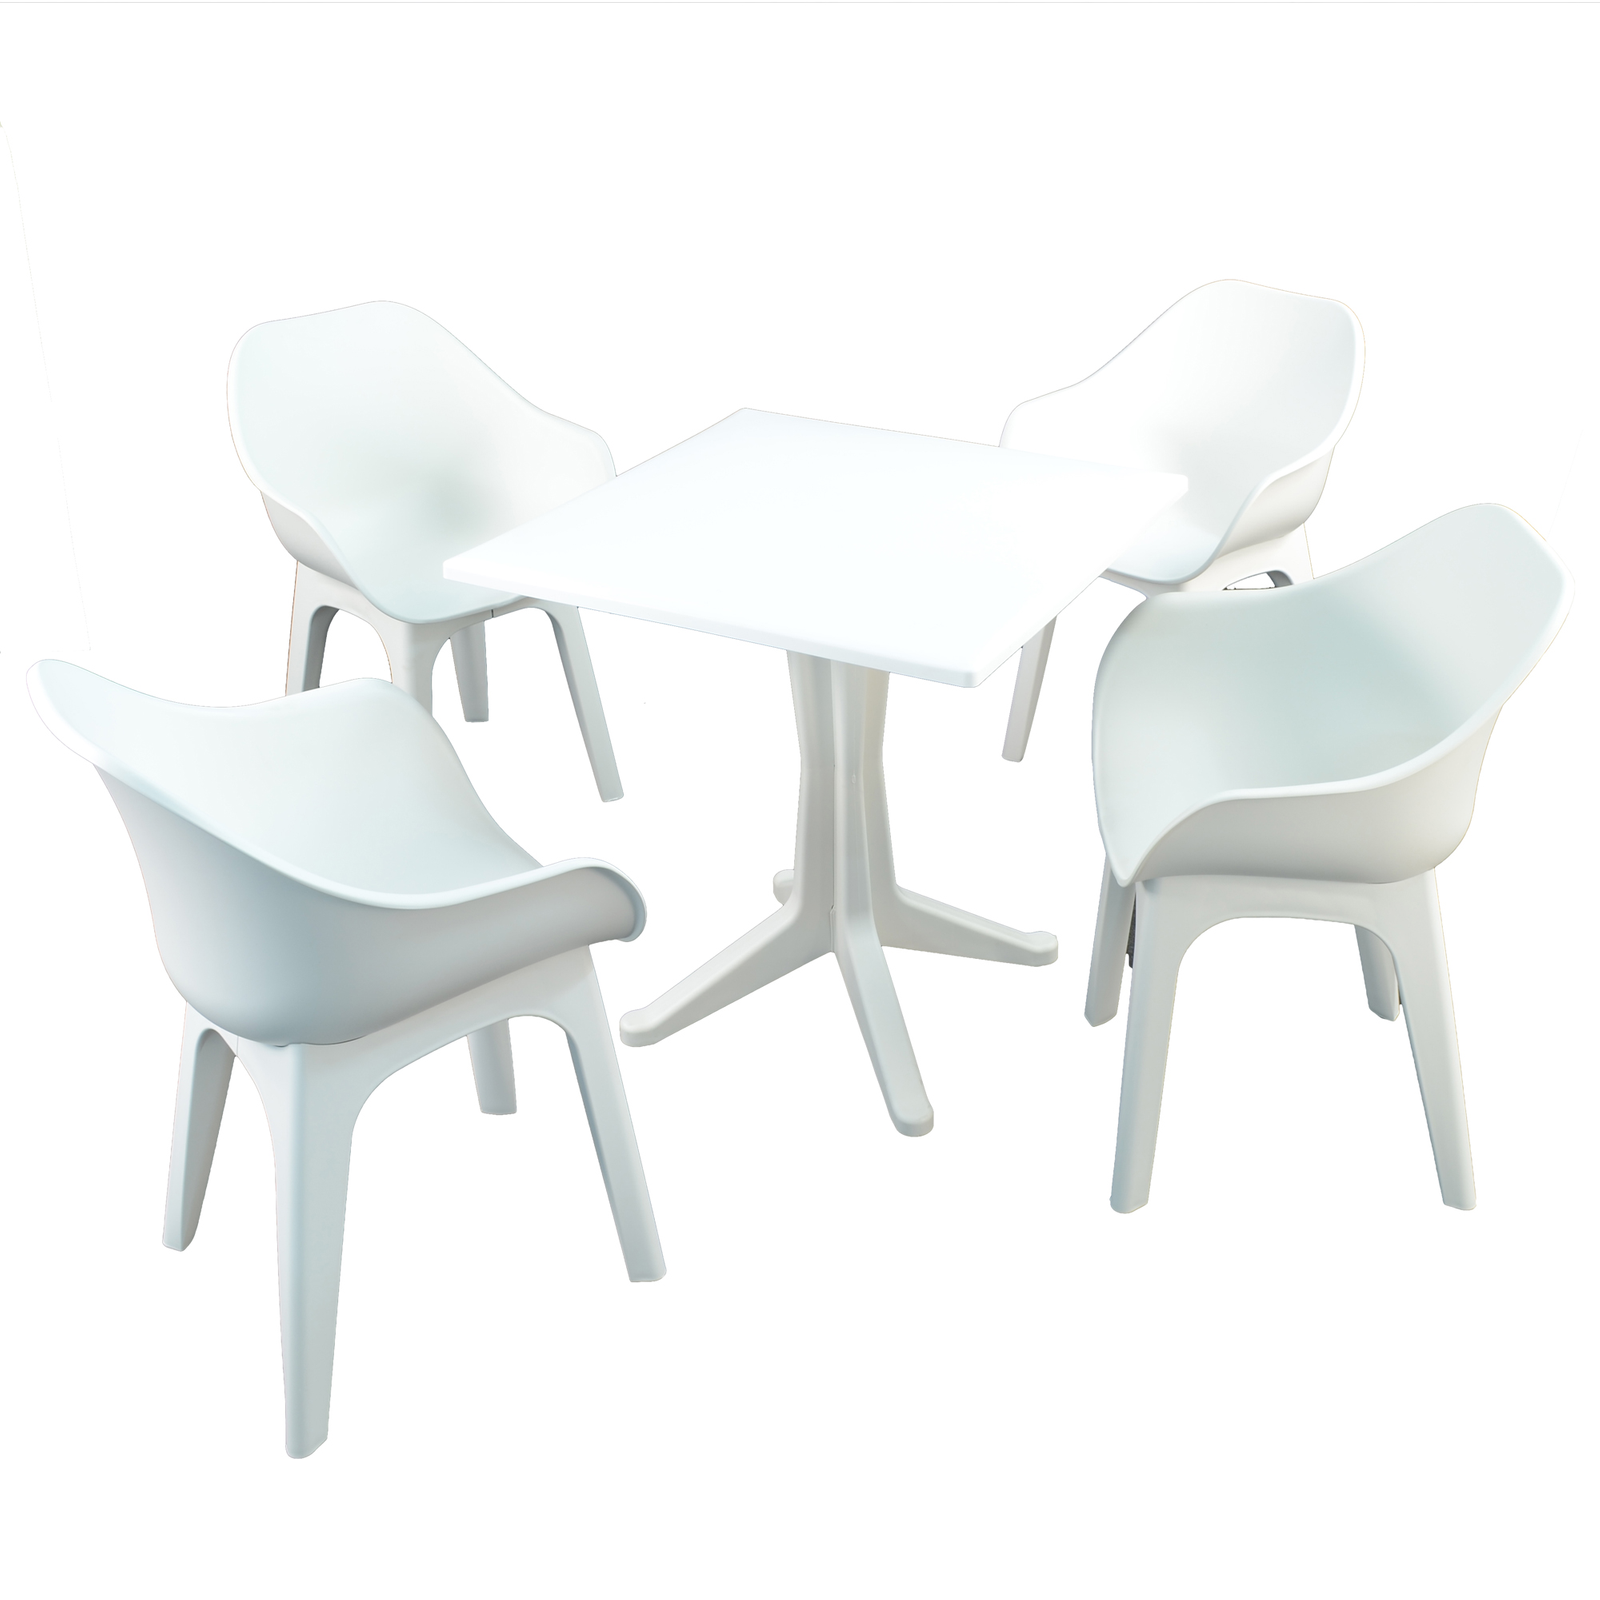 Trabella White Ponente Dining Table with 4 Ghibli Chairs Dining Sets Trabella Default Title  